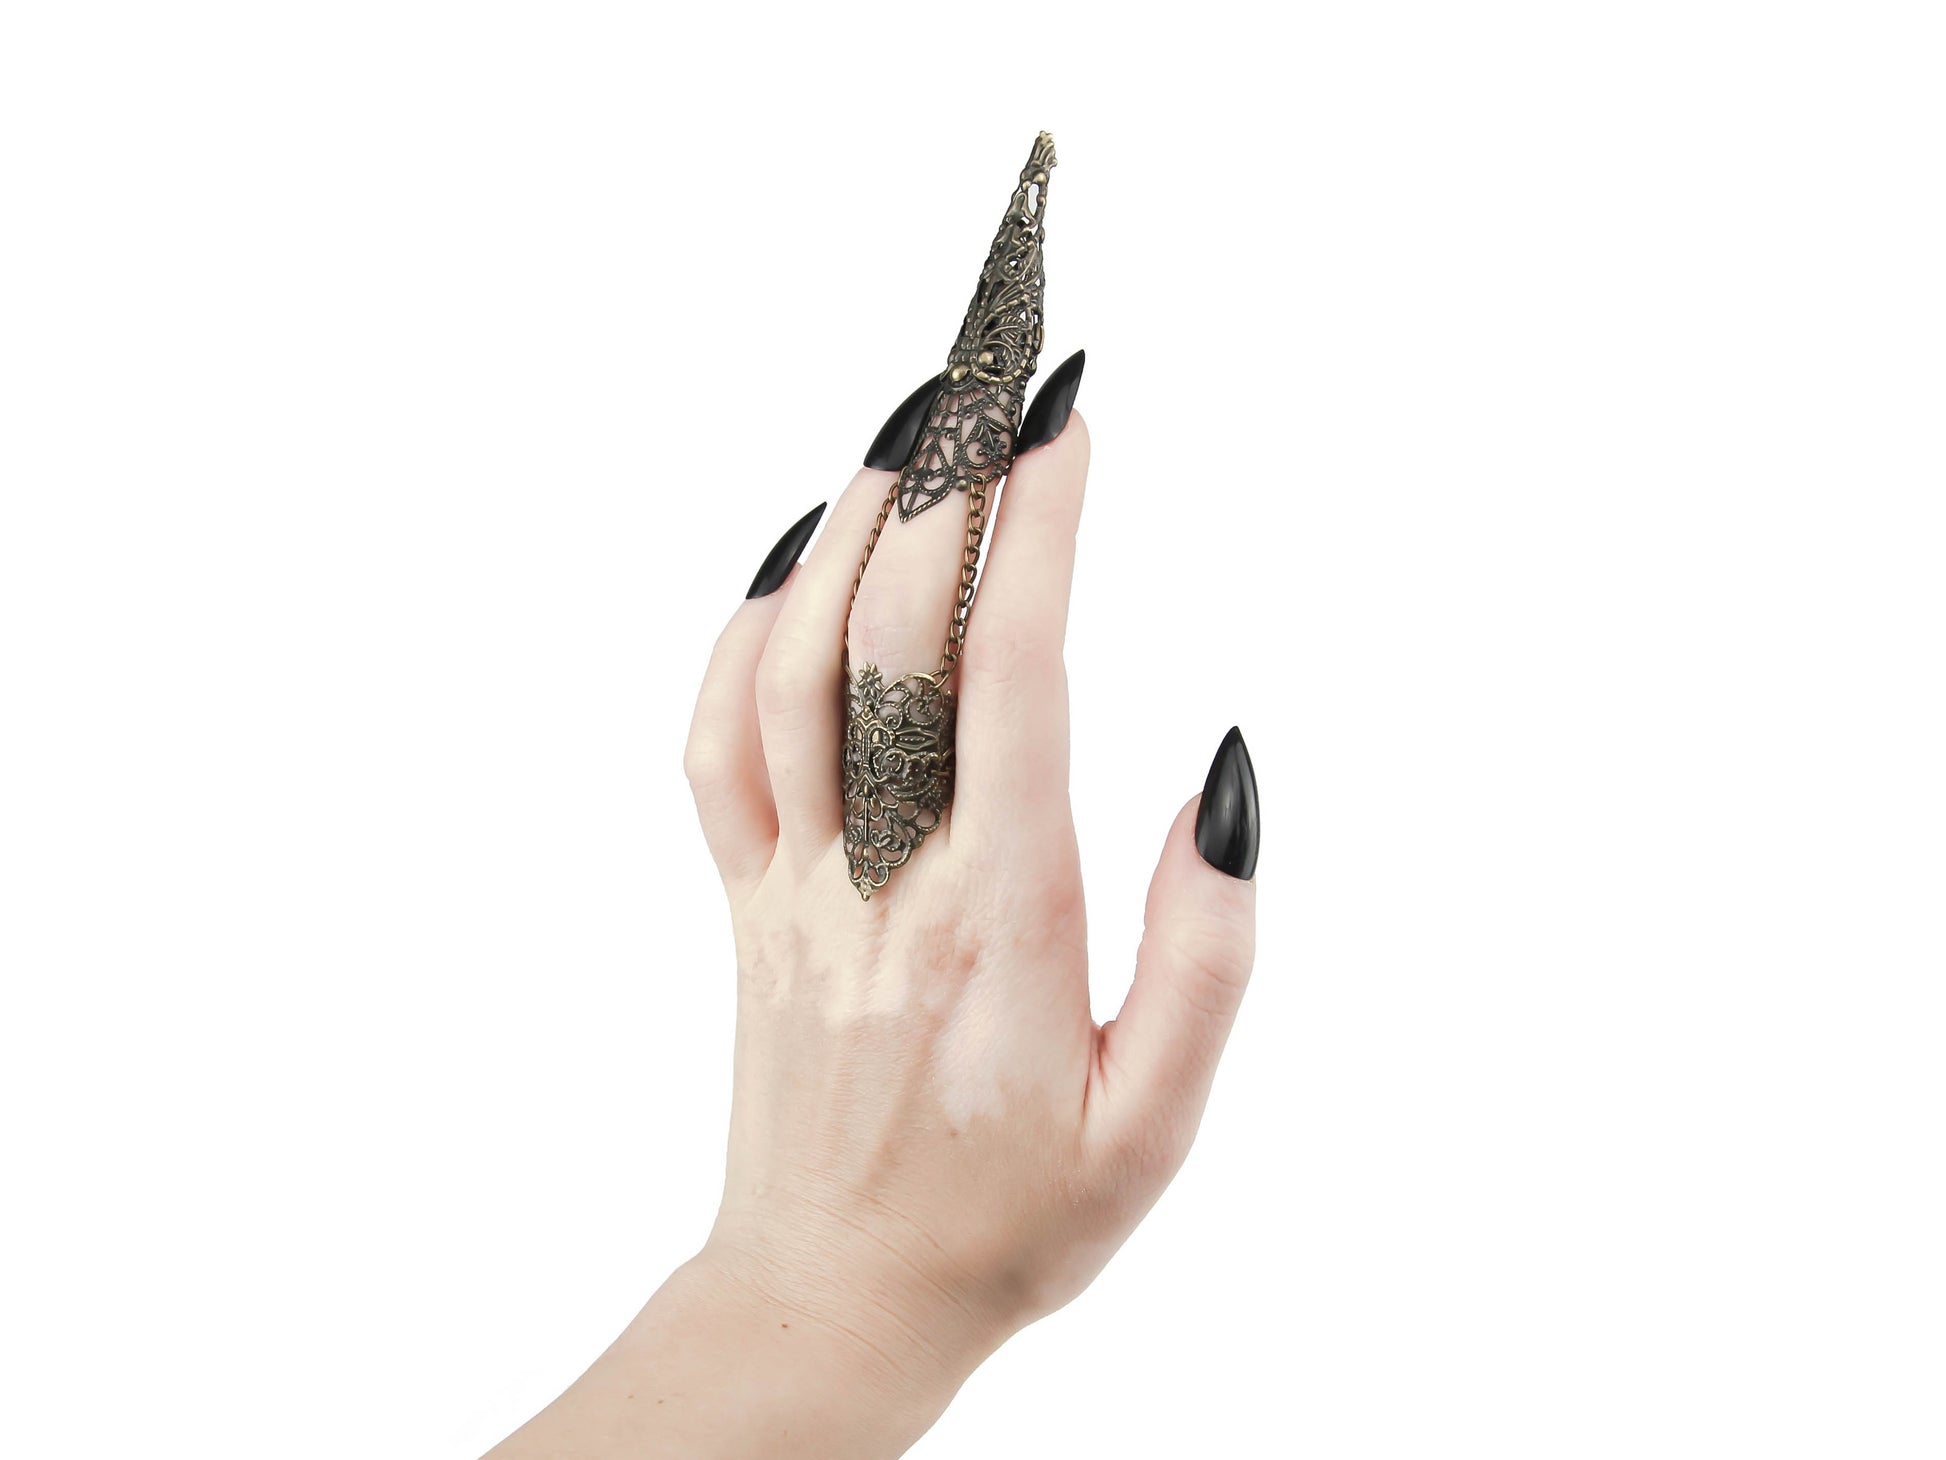 A hand is adorned with a Myril Jewels full finger claw ring, designed with a detailed filigree that evokes a neo-goth sensibility. The bronze claw ring extends over the length of the finger, culminating in a tapered tip, perfect for a dark-avantgarde look. This statement jewelry piece is ideal for Halloween, complements punk attire, and adds an edge to gothic-chic, whimsigoth, and witchcore styles. It's also suitable for everyday wear, rave parties, festival outfits, and drag queen adornments.